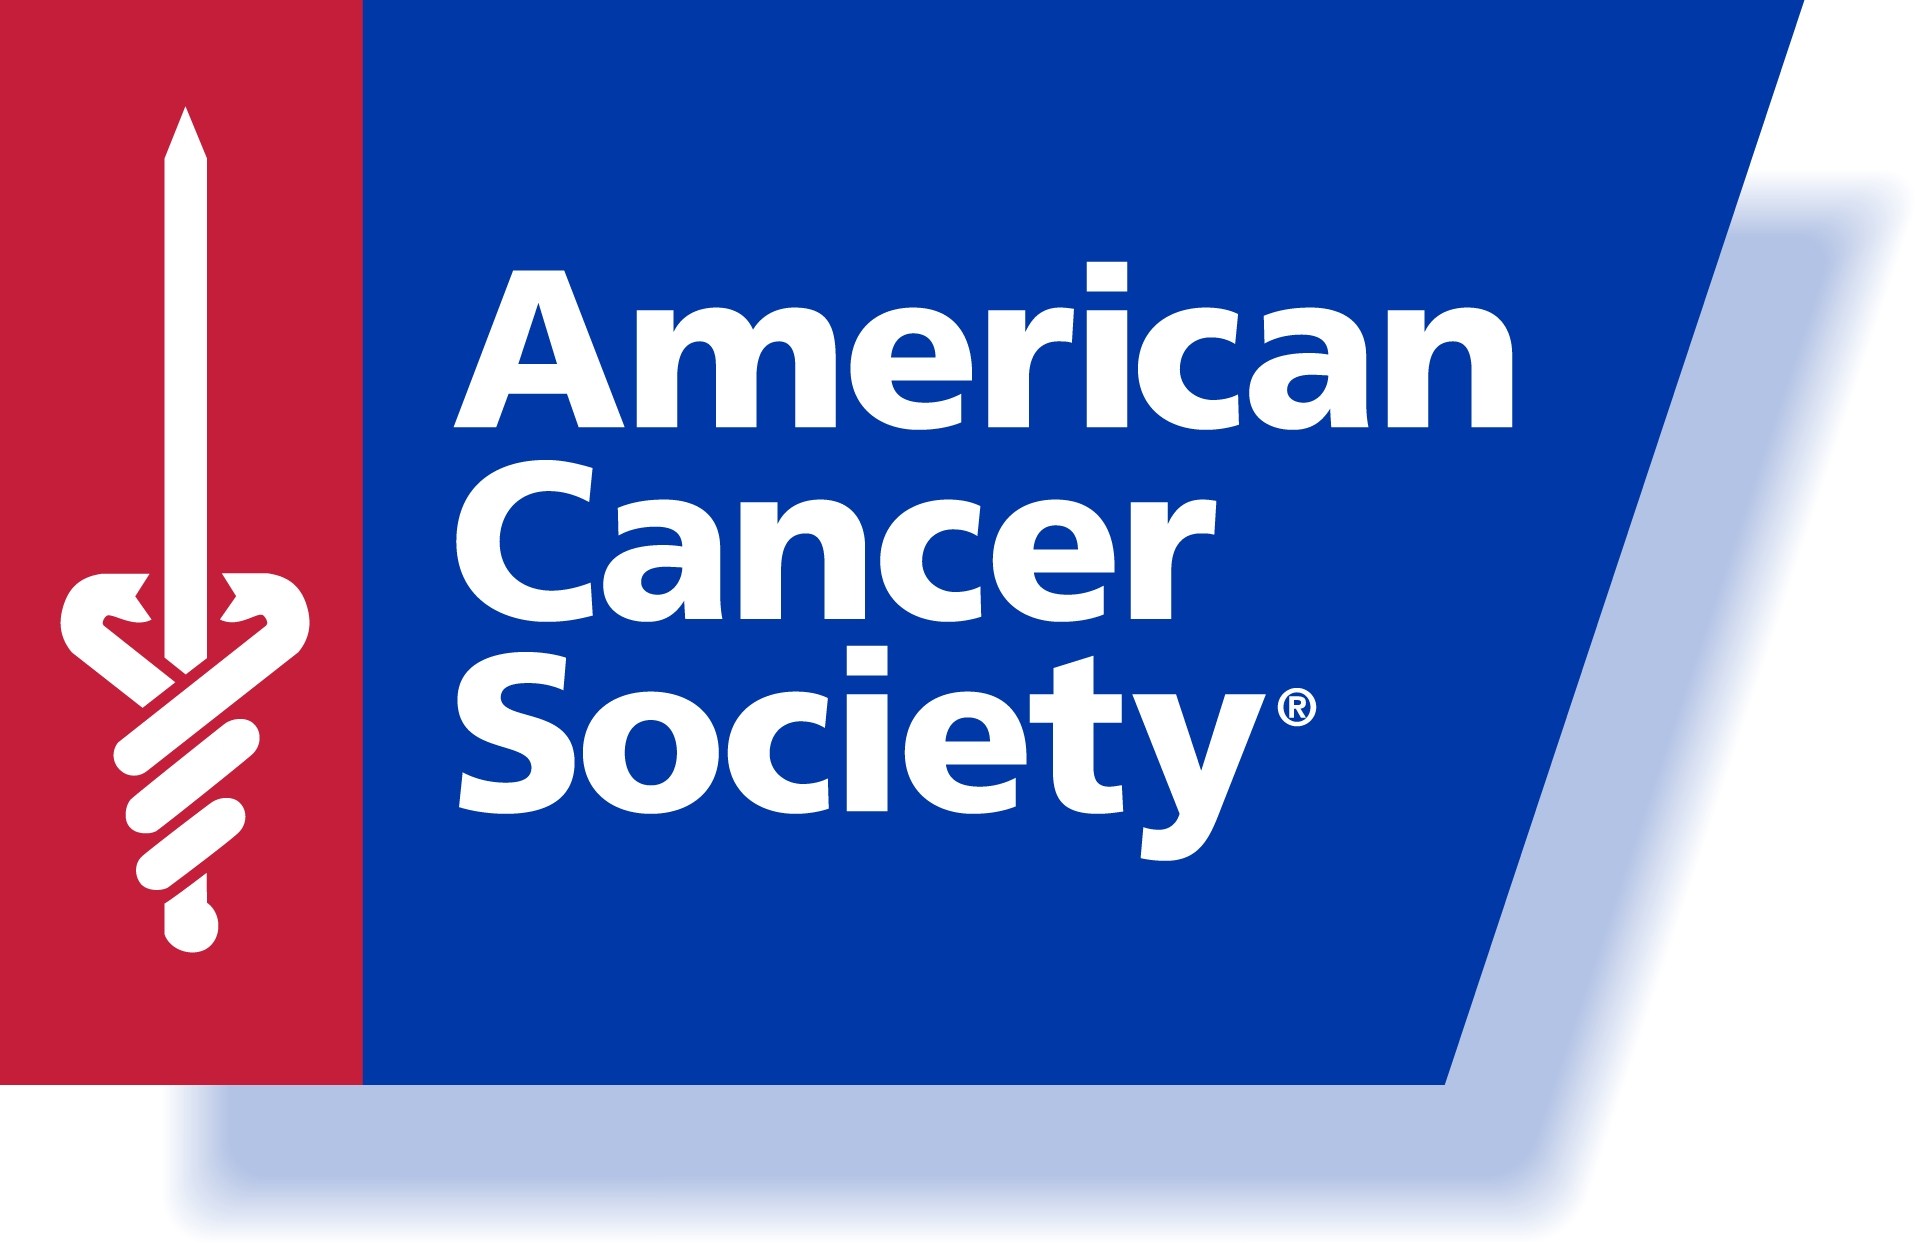 Spotlight on our Partner The American Cancer Society